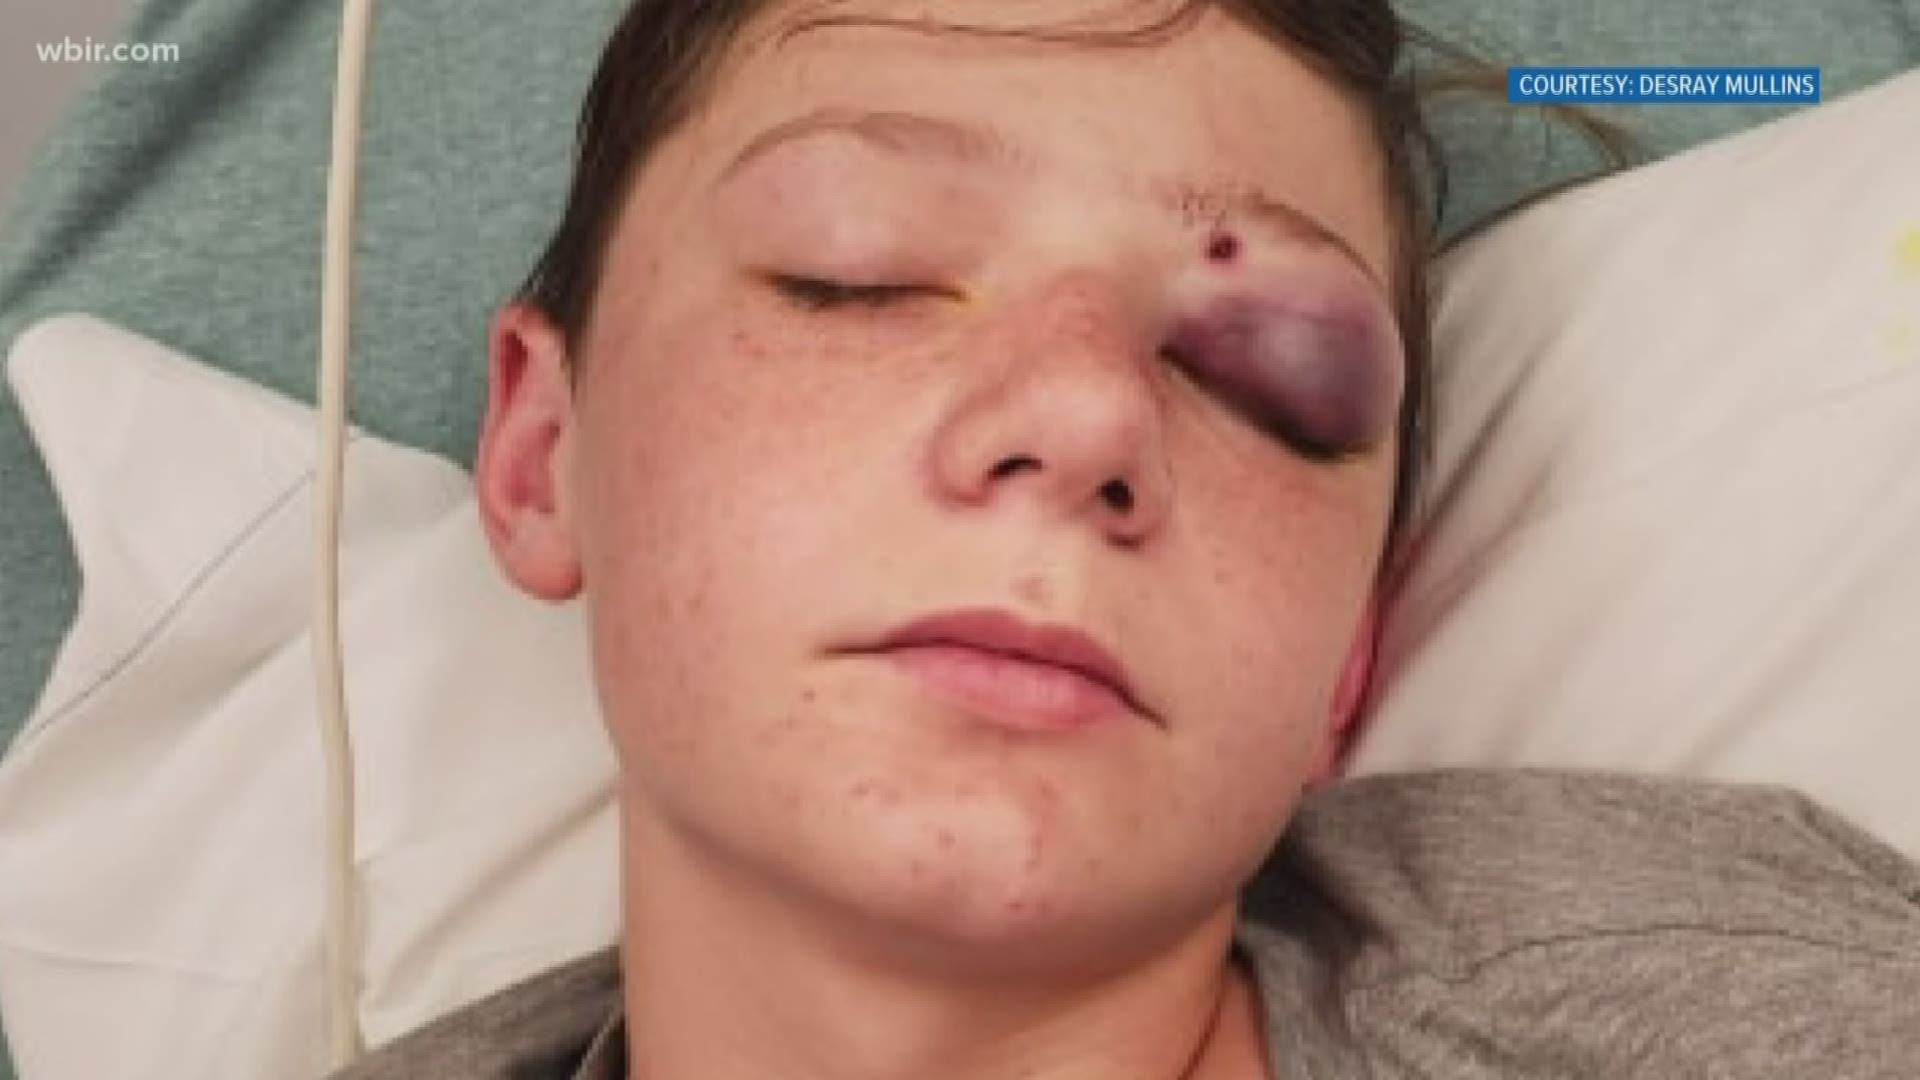 A Morristown teen will recover after being shot in the head with a BB gun, but the BB will remain lodged in his brain because surgery is too risky.